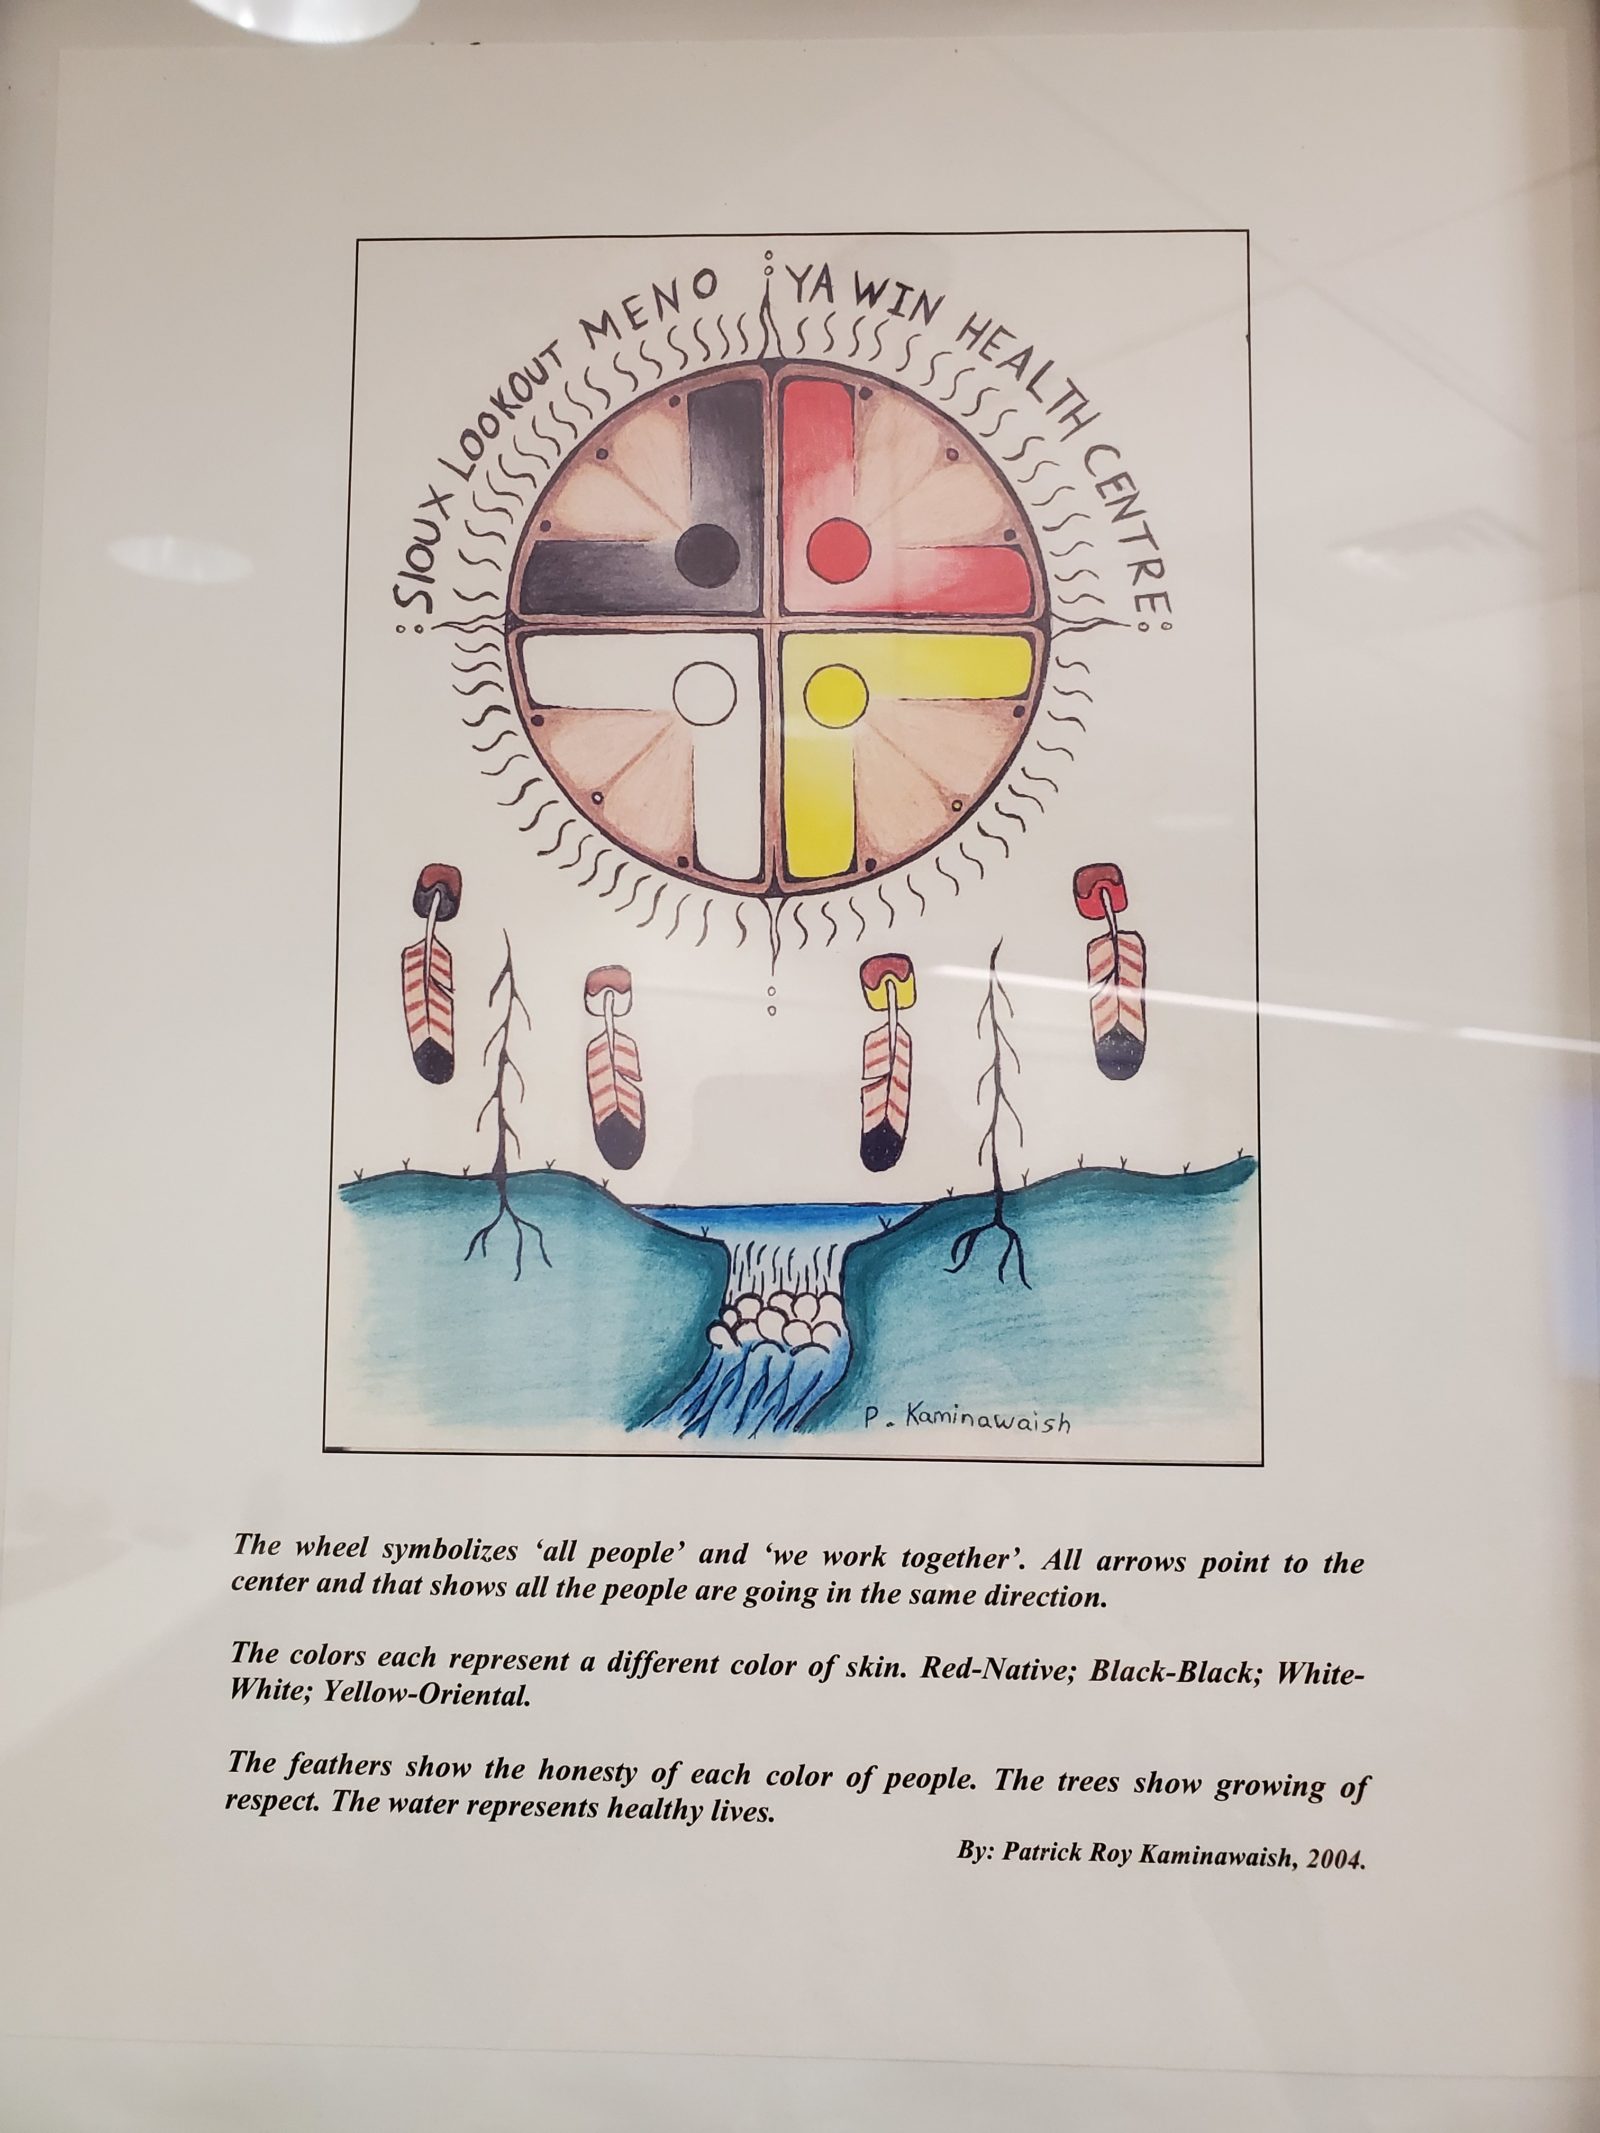 Original drawing and entry of the Sioux Lookout Meno Ya Win Health Centre logo.